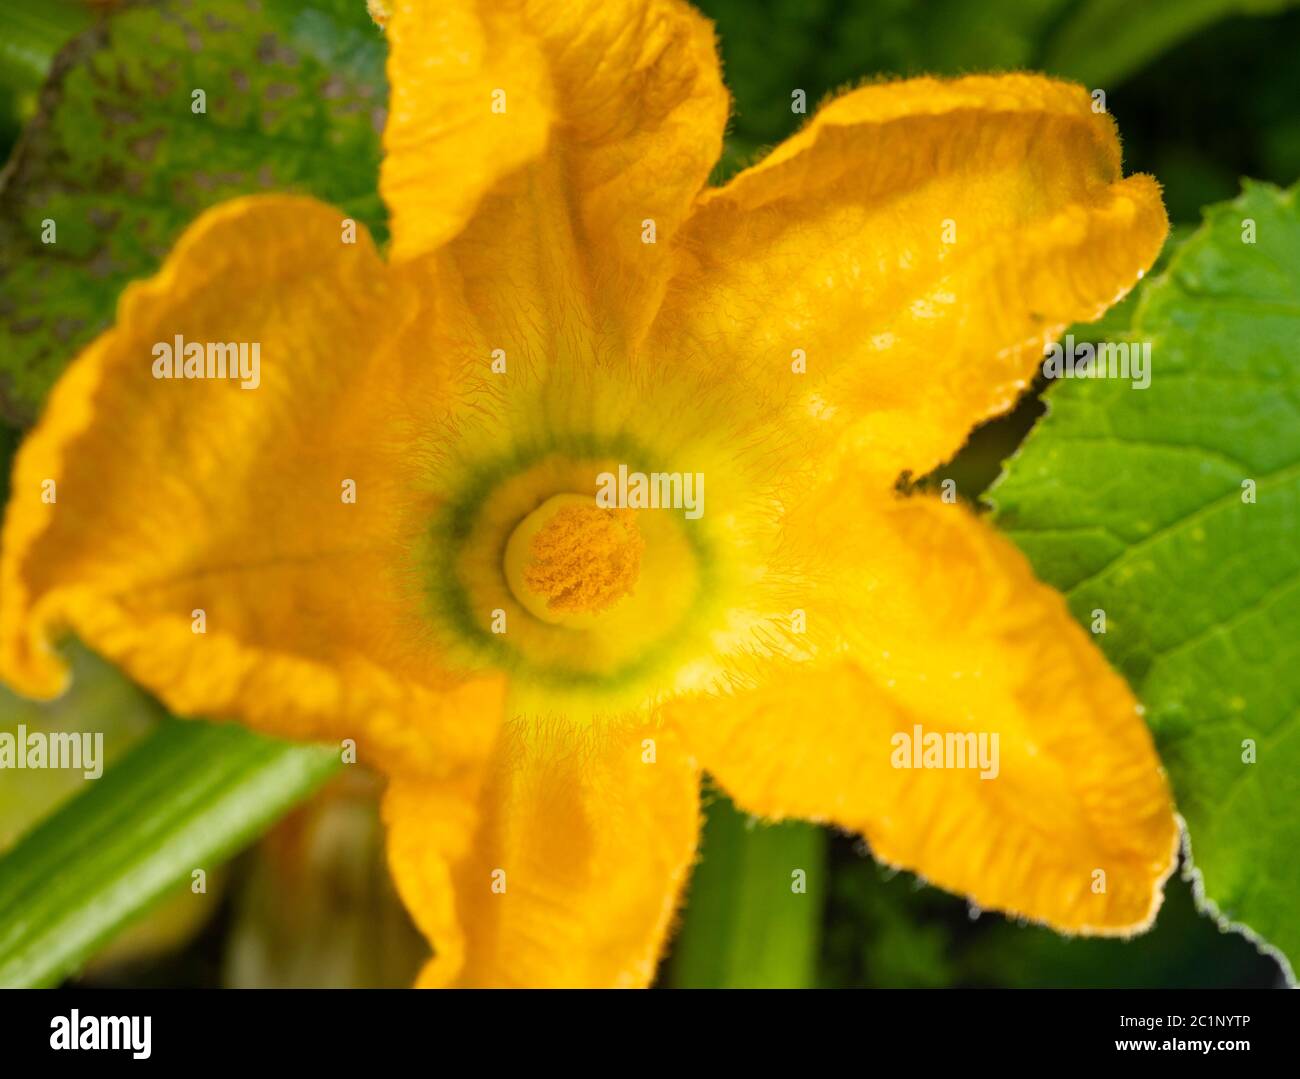 Yellow flower of Zucchini or Squash plant, Cucurbita pepo, 'Black Jack'. This macro shot shows the detail of the stamen in the male flower, close up Stock Photo